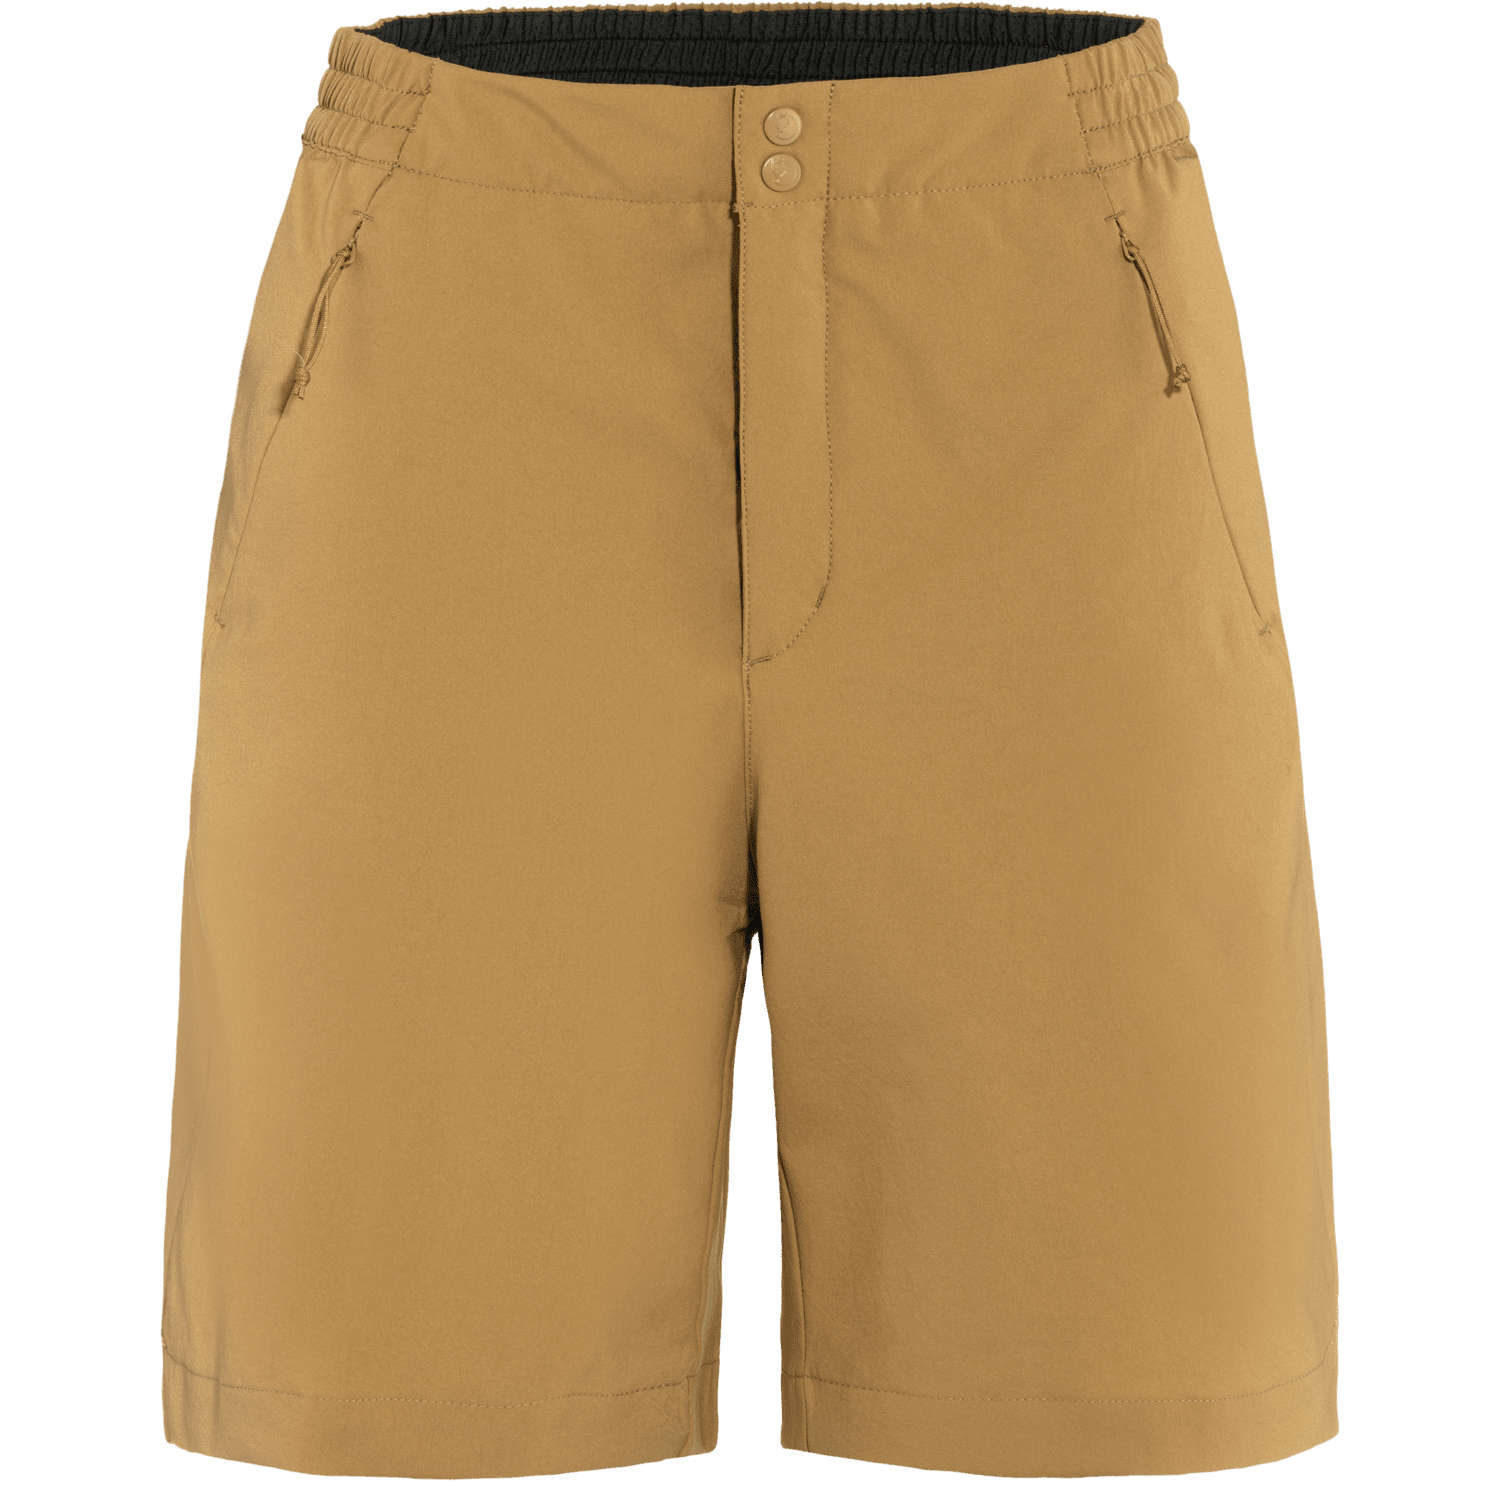 High Shade Shorts - genanvendt polyester - Weekendbee sustainable sportswear